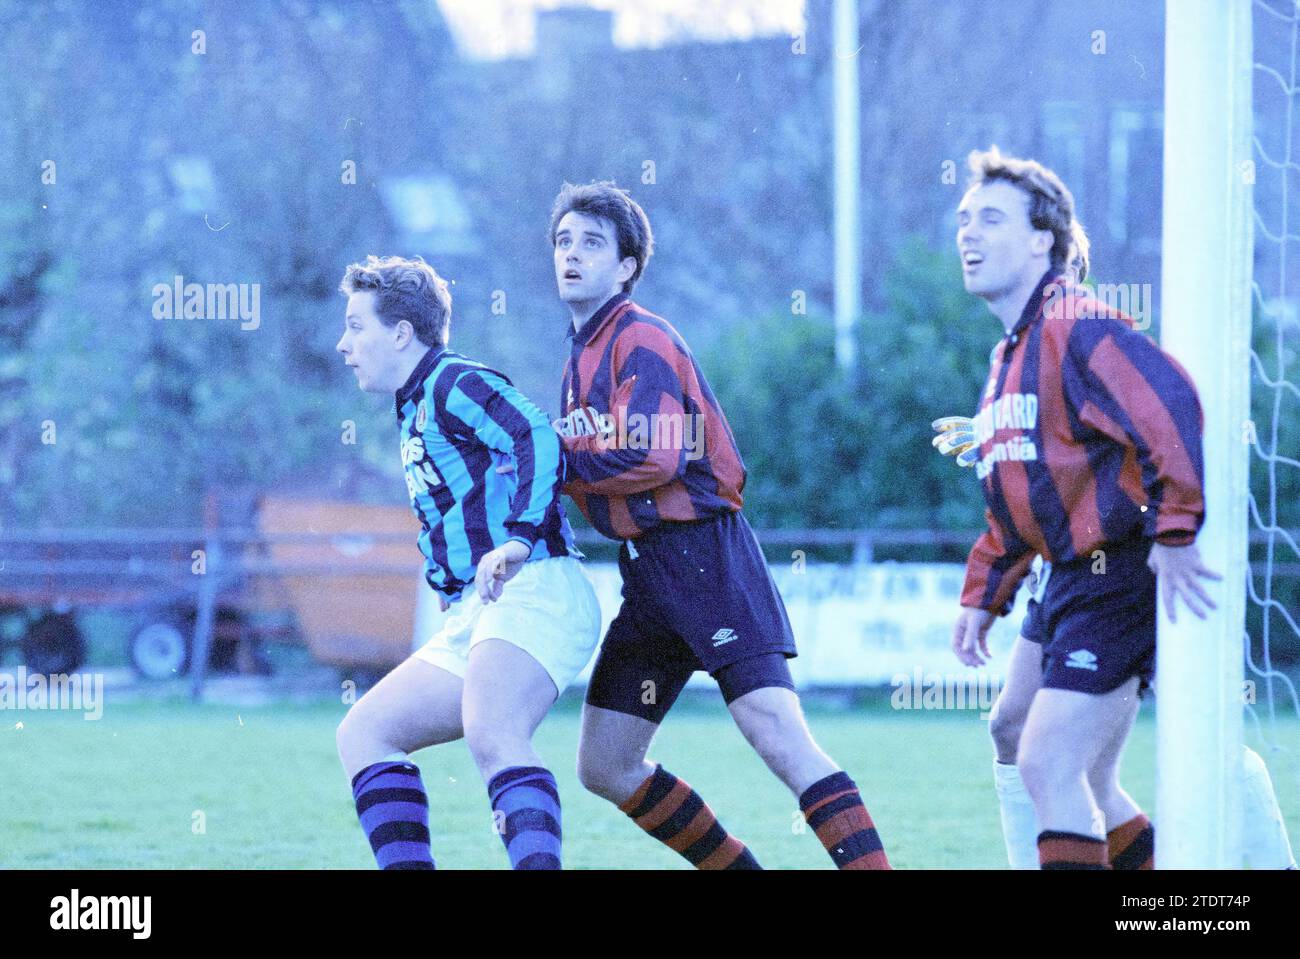 Football, RCH - EDO, 03-12-1994, Whizgle News from the Past, Tailored for the Future. Explore historical narratives, Dutch The Netherlands agency image with a modern perspective, bridging the gap between yesterday's events and tomorrow's insights. A timeless journey shaping the stories that shape our future Stock Photo